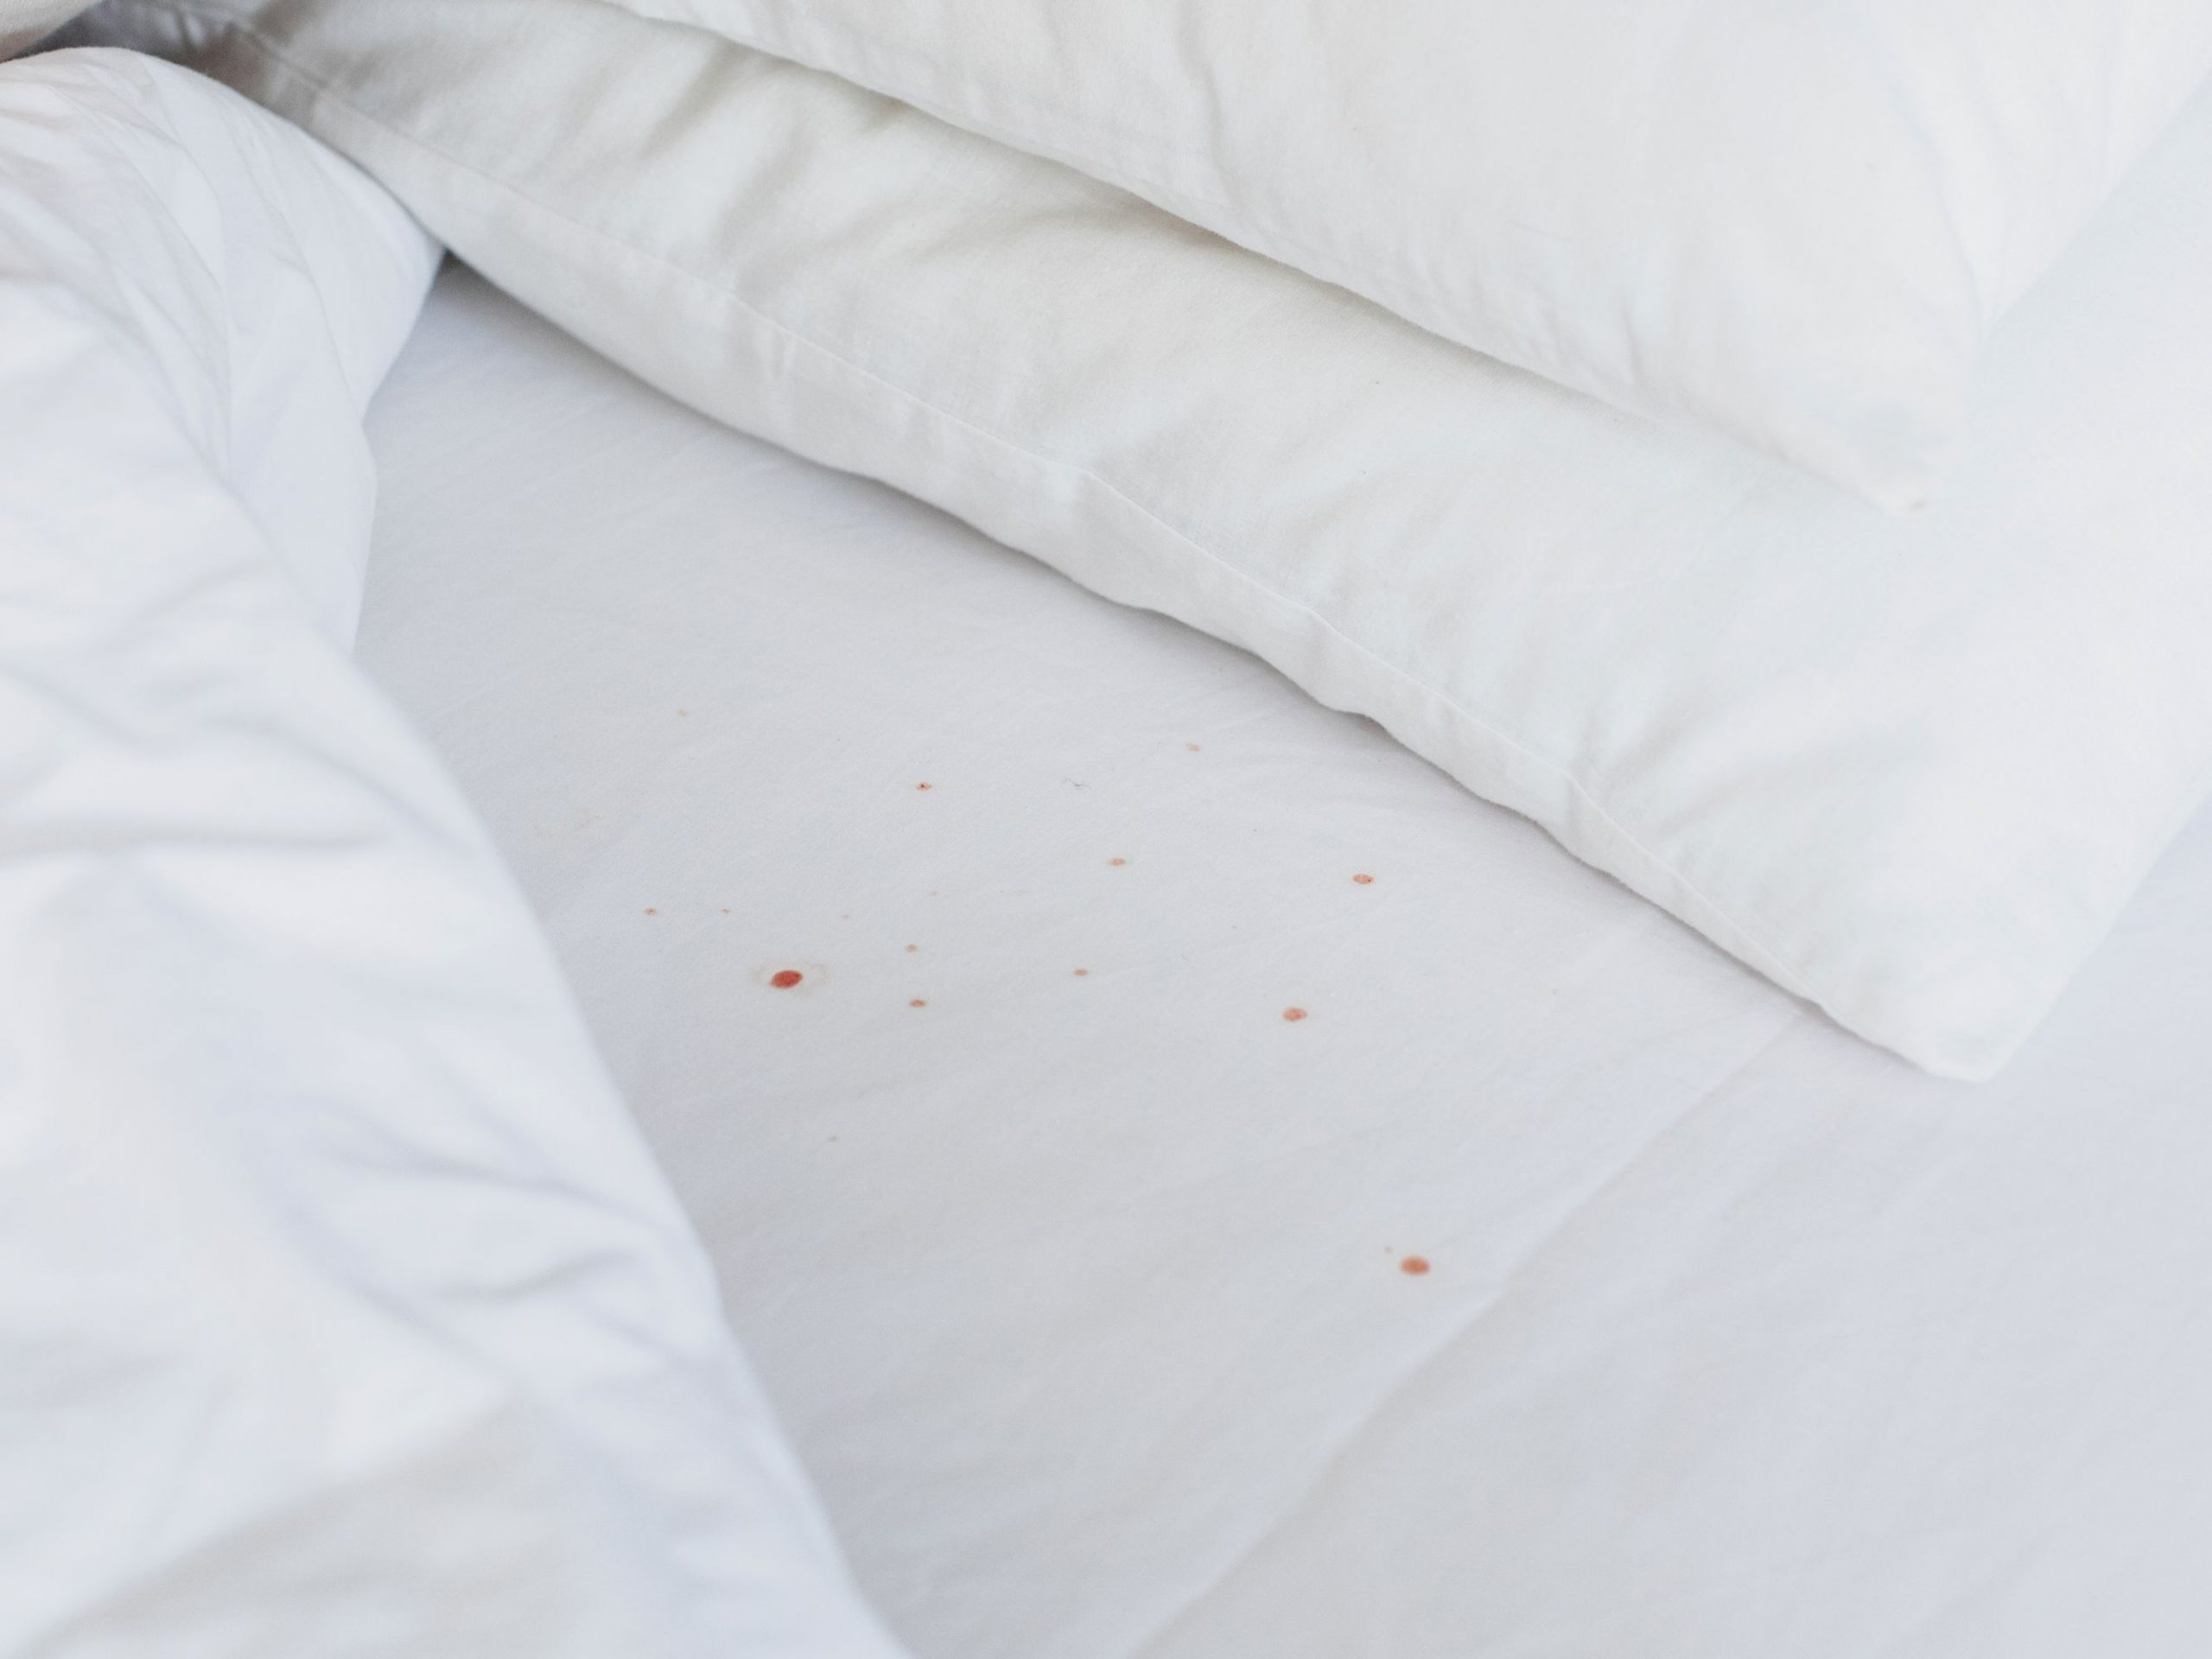 remove bed bug stains from mattress